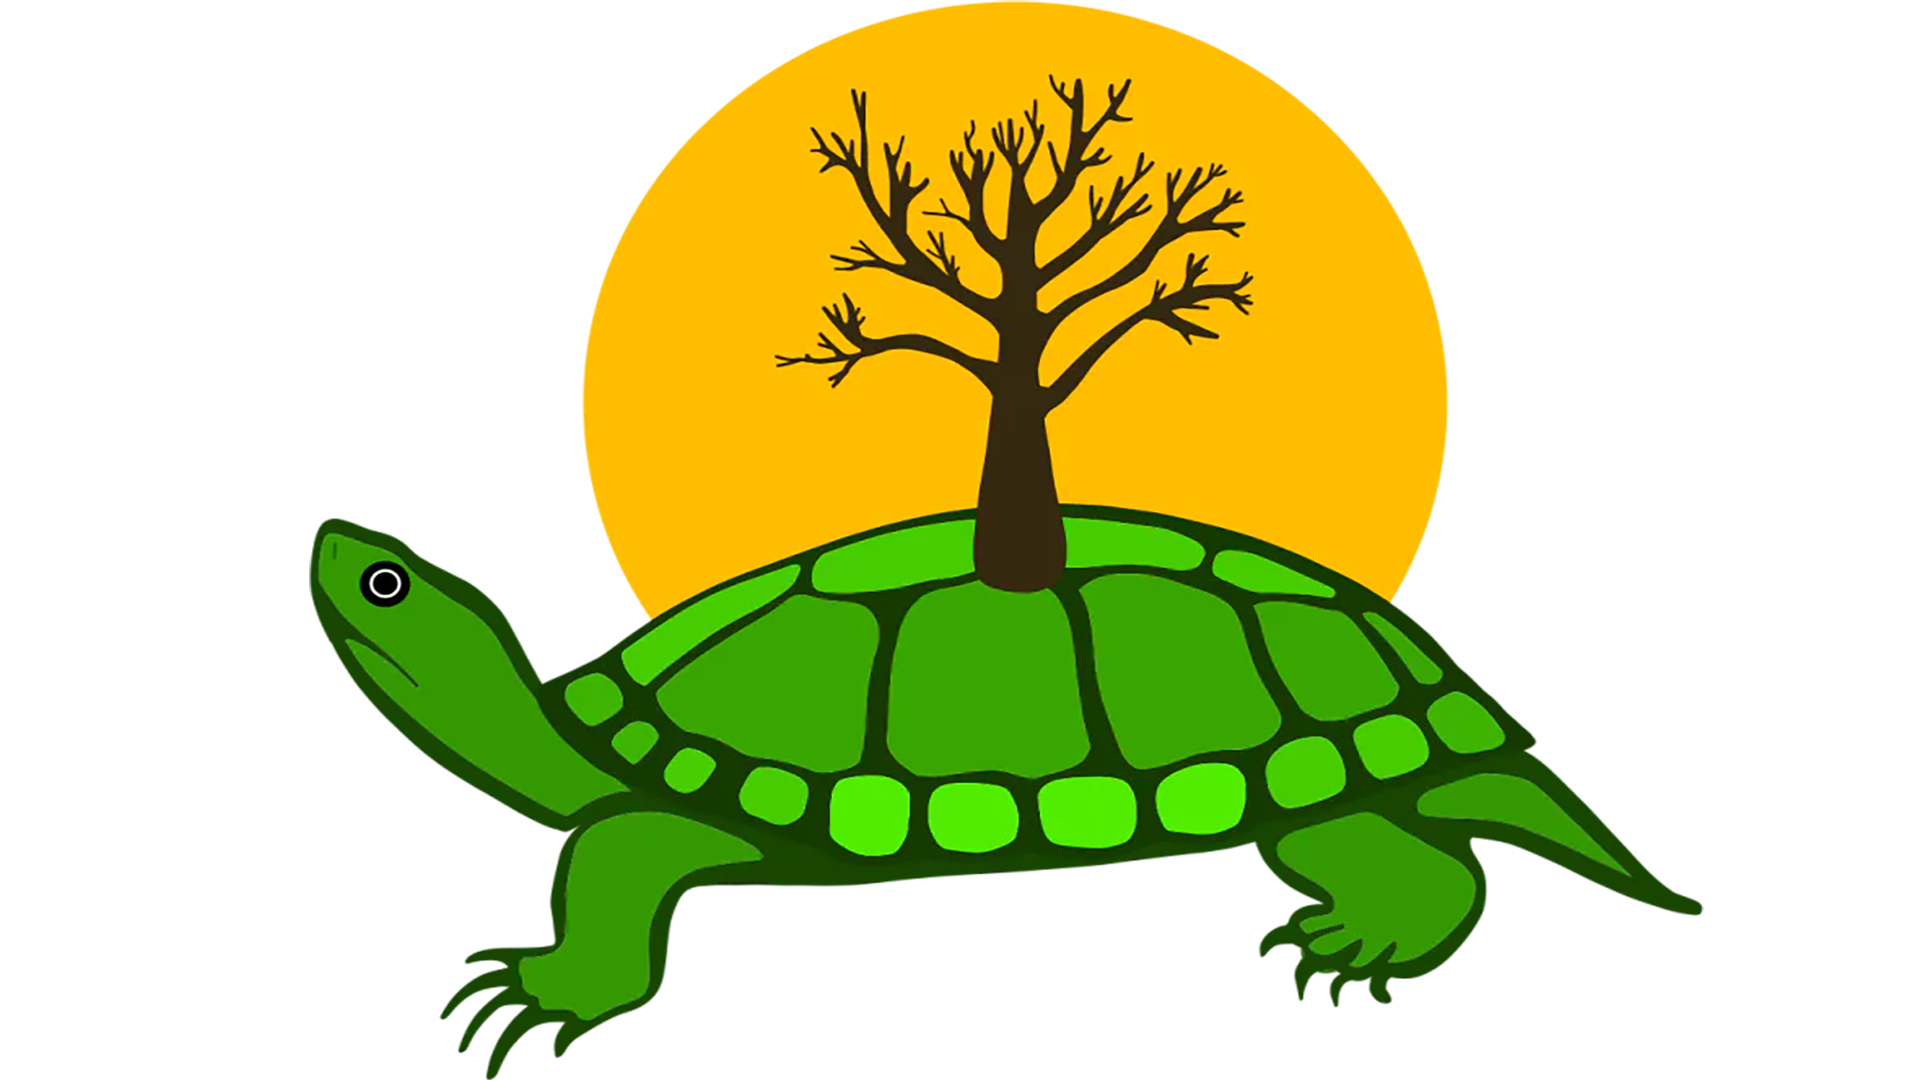 illustration of a green turtle with a tree growing out of the turtle's shell. A yellow circle behind the tree resembles the sun.